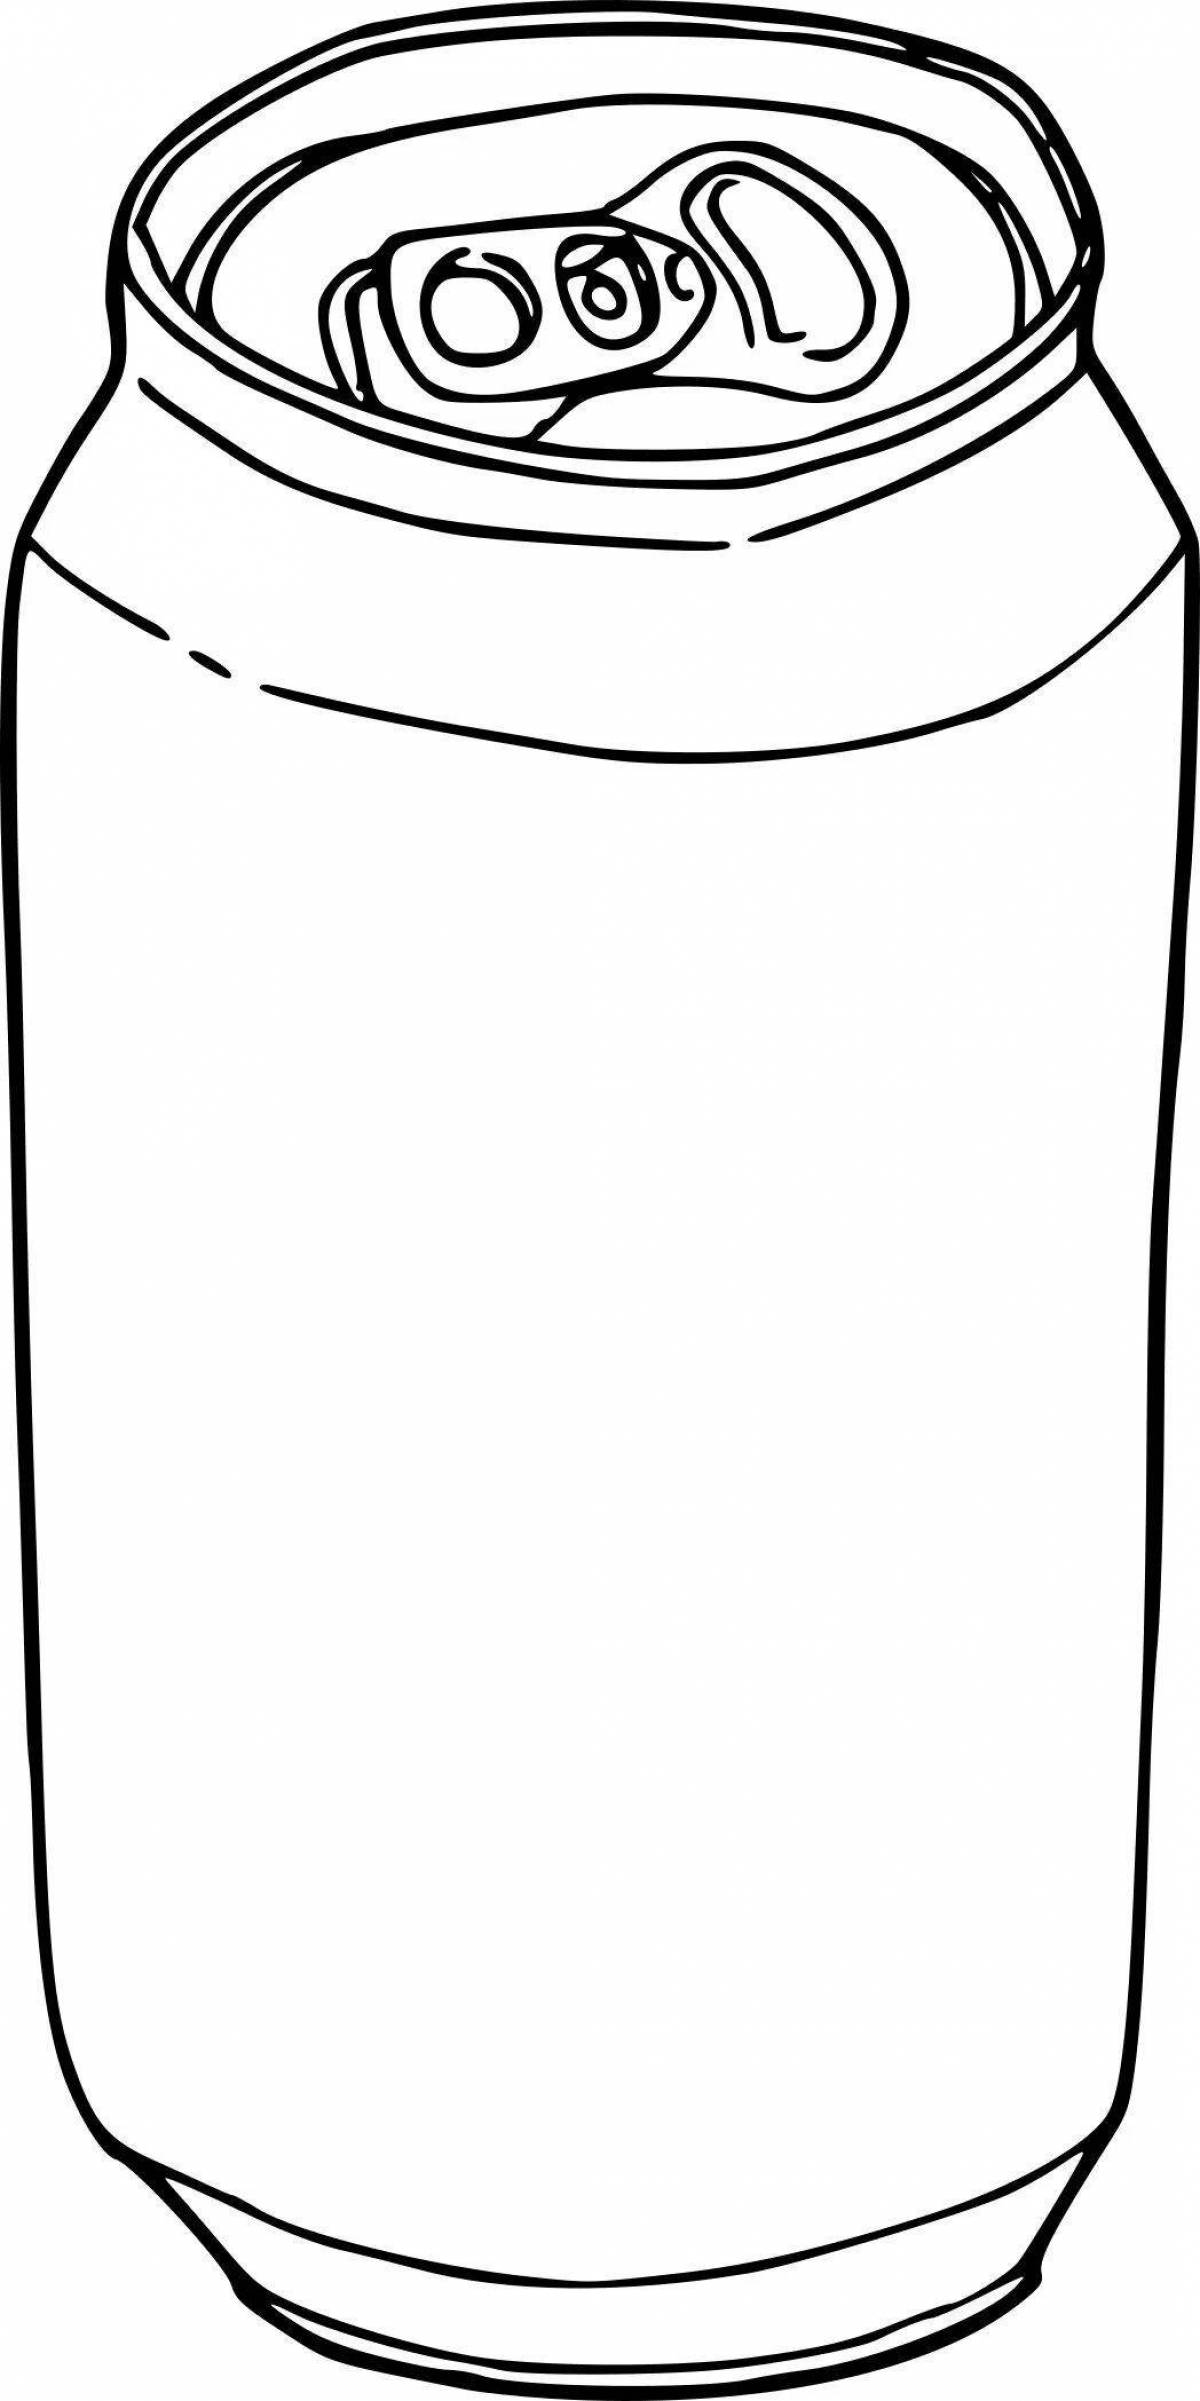 Refreshing coke can coloring page